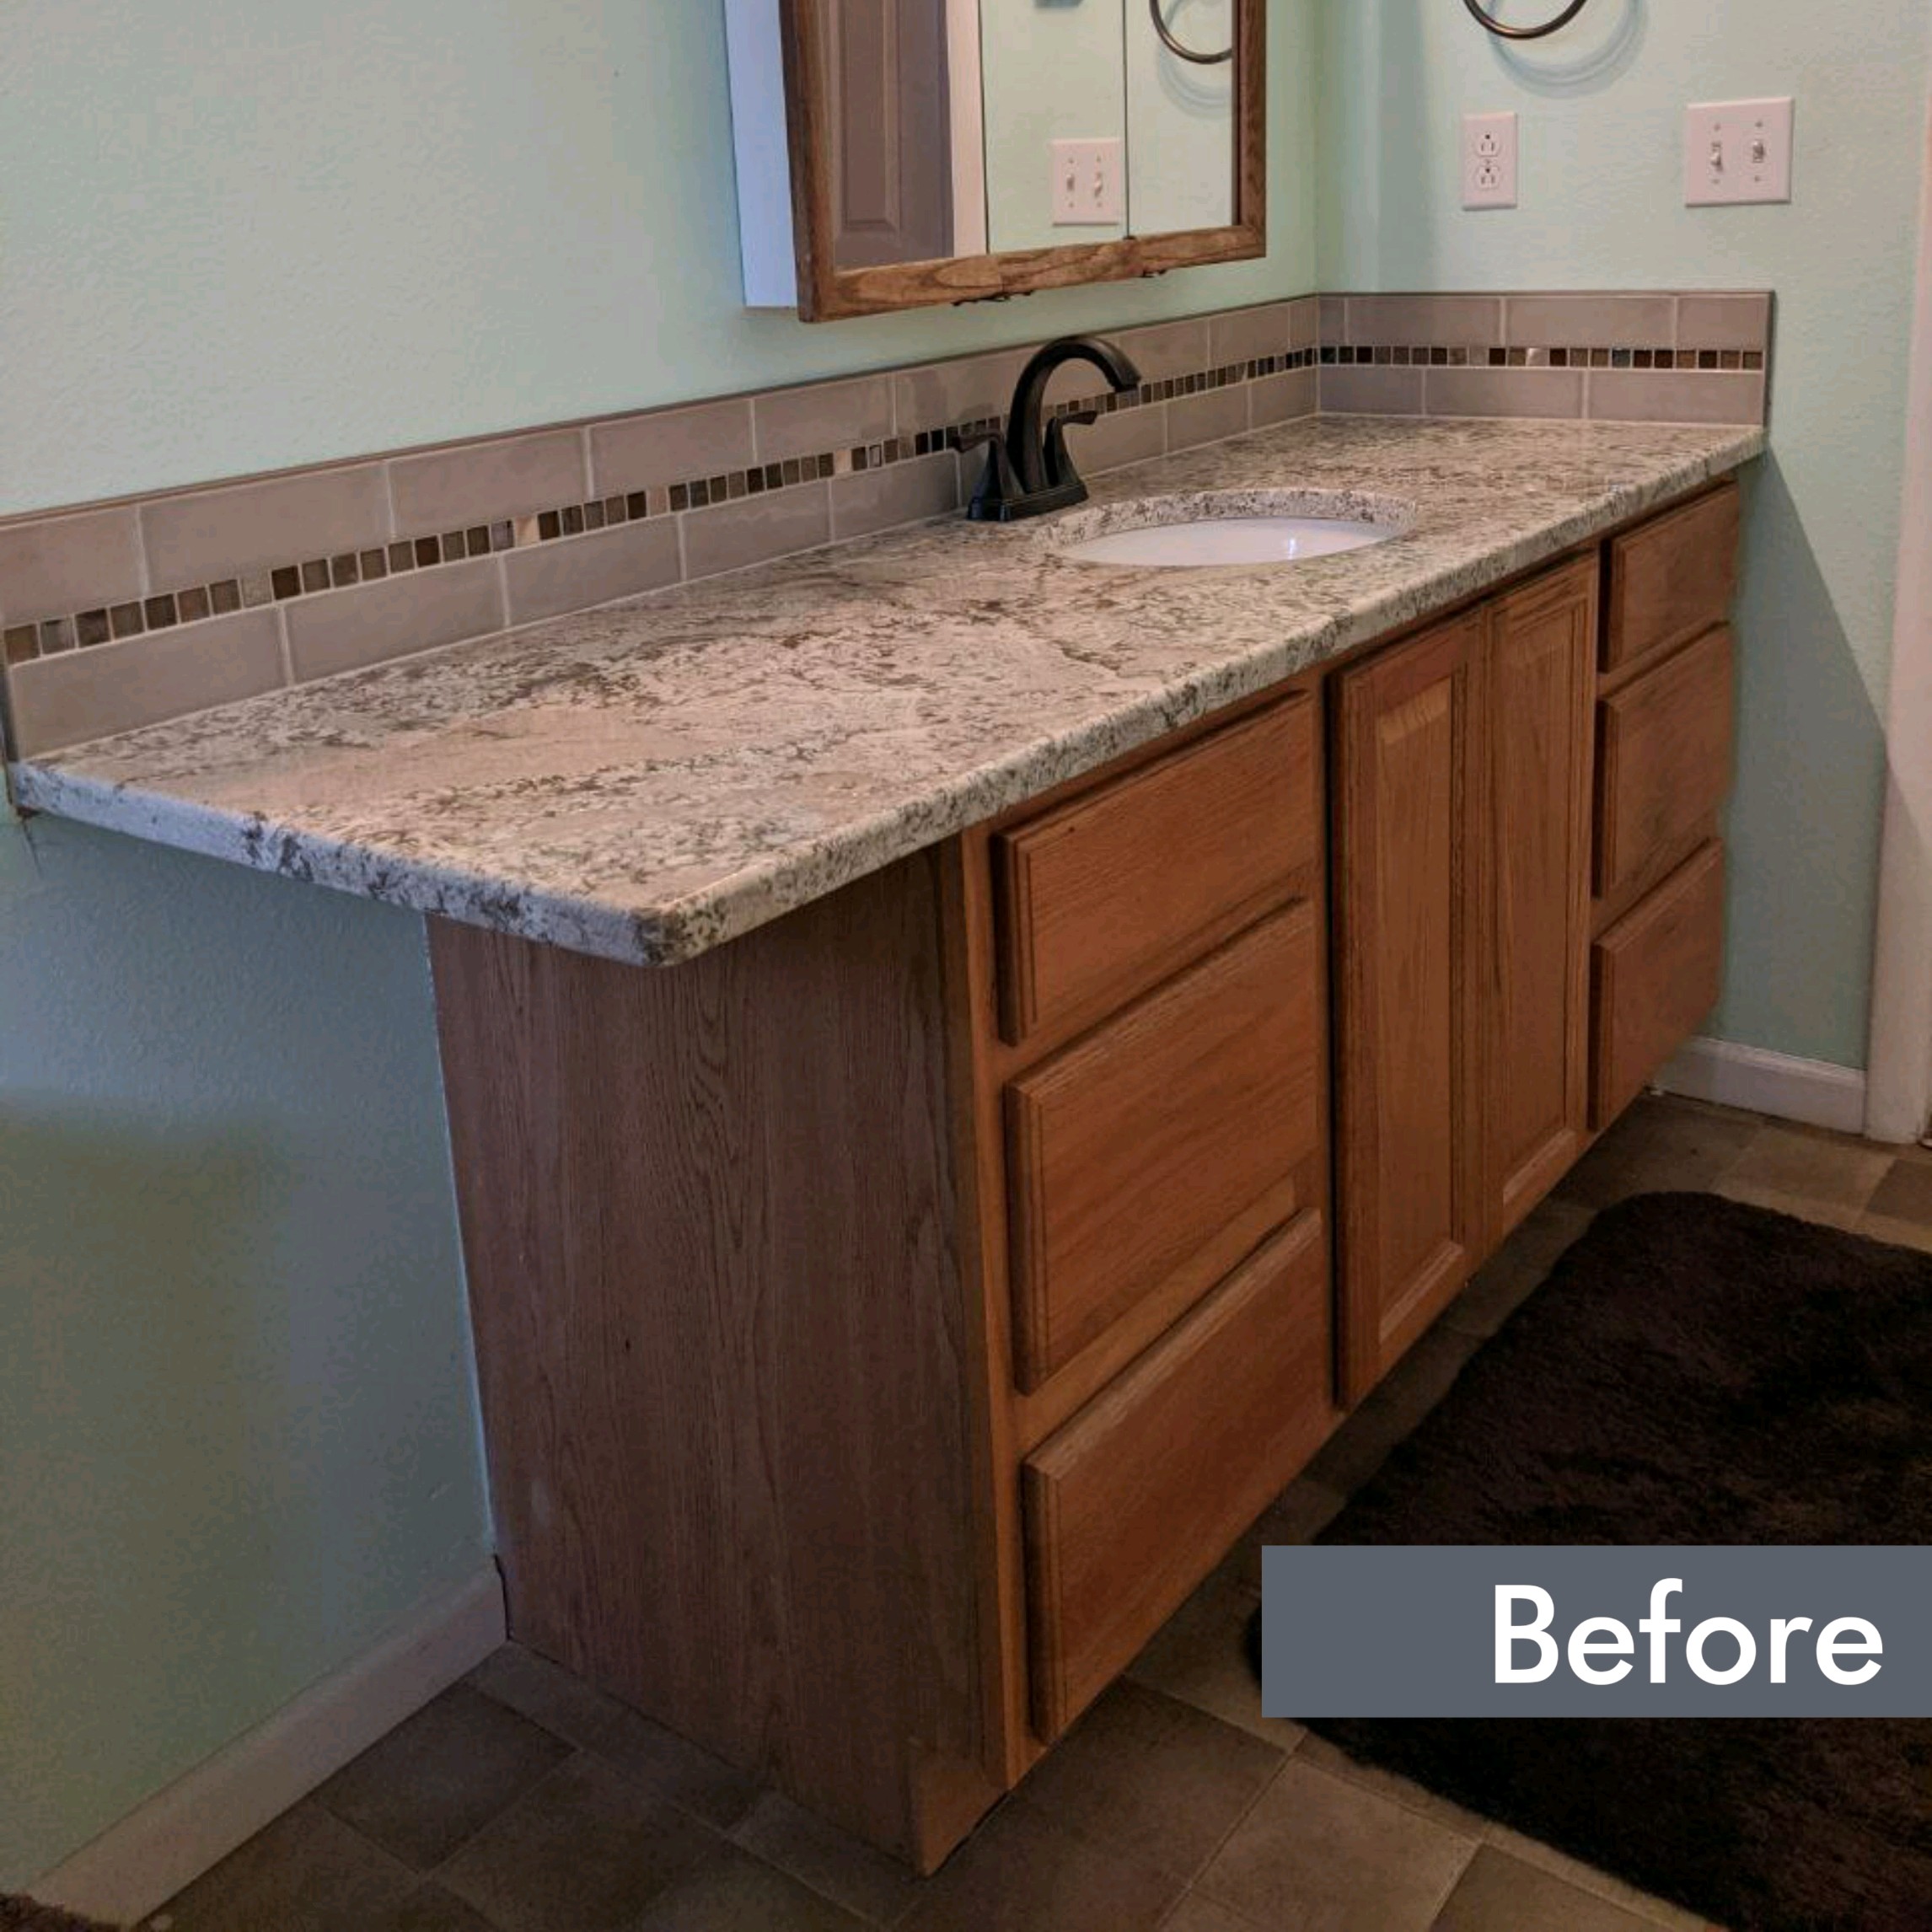 Before-Before and after of a cabinet door replacement project in a Boise bathroom